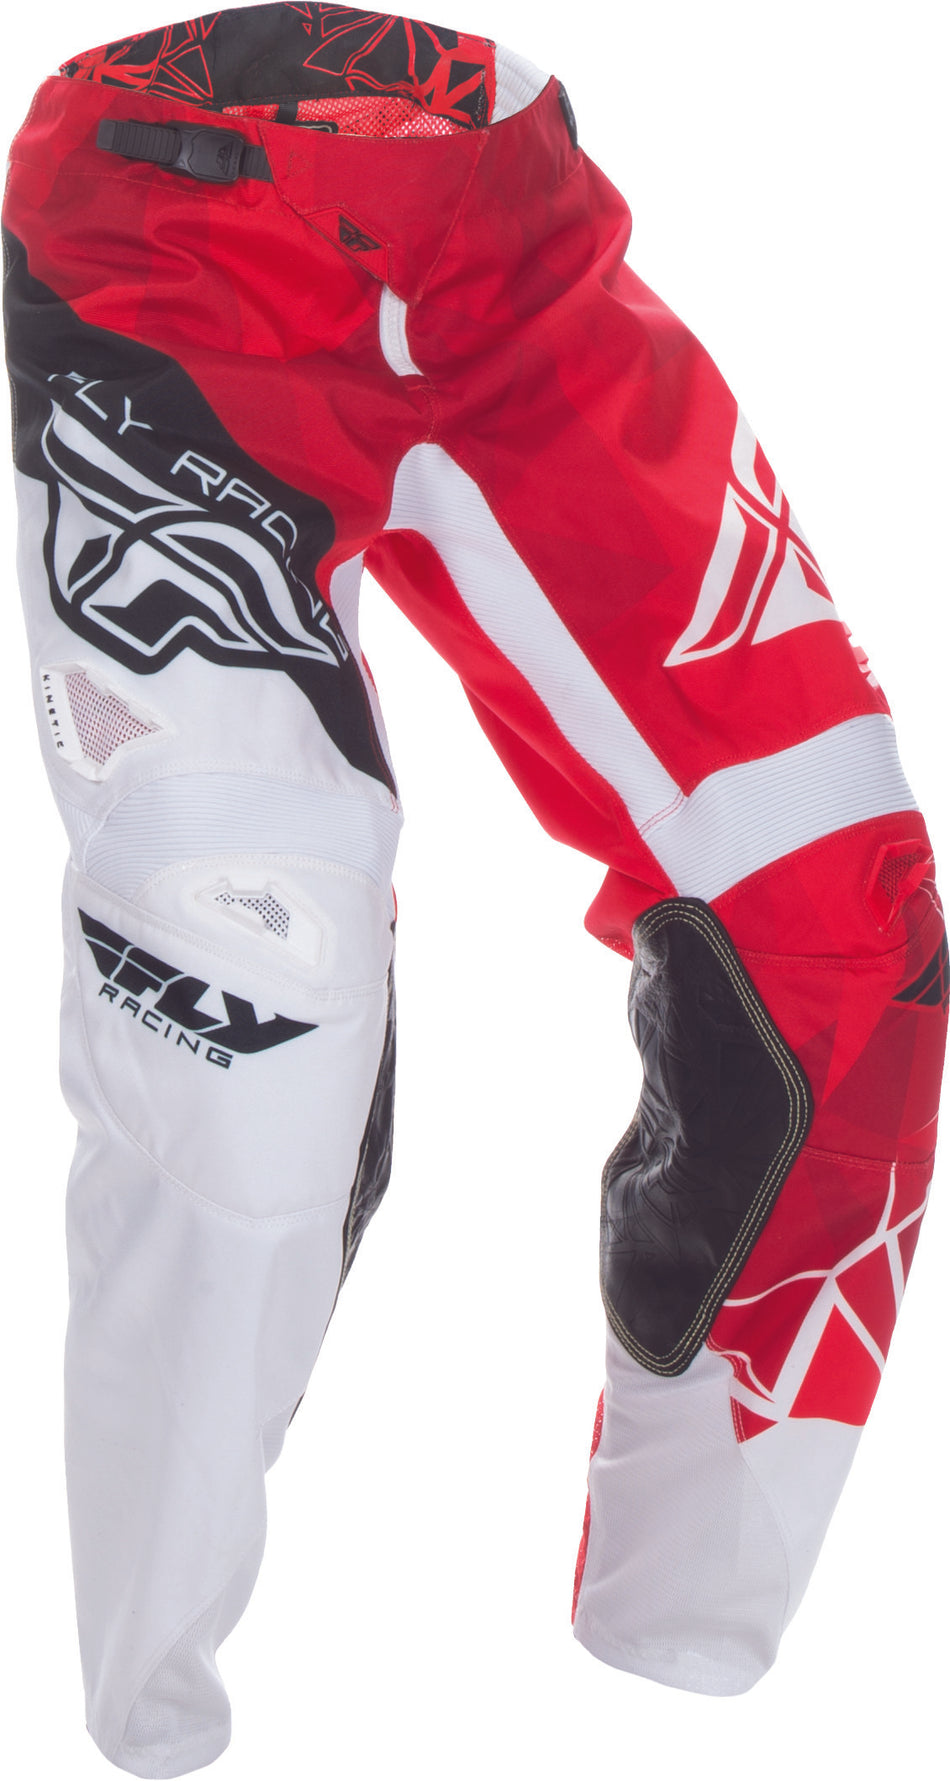 FLY RACING Kinetic Crux Pant Red/White Sz 28s 370-53228S